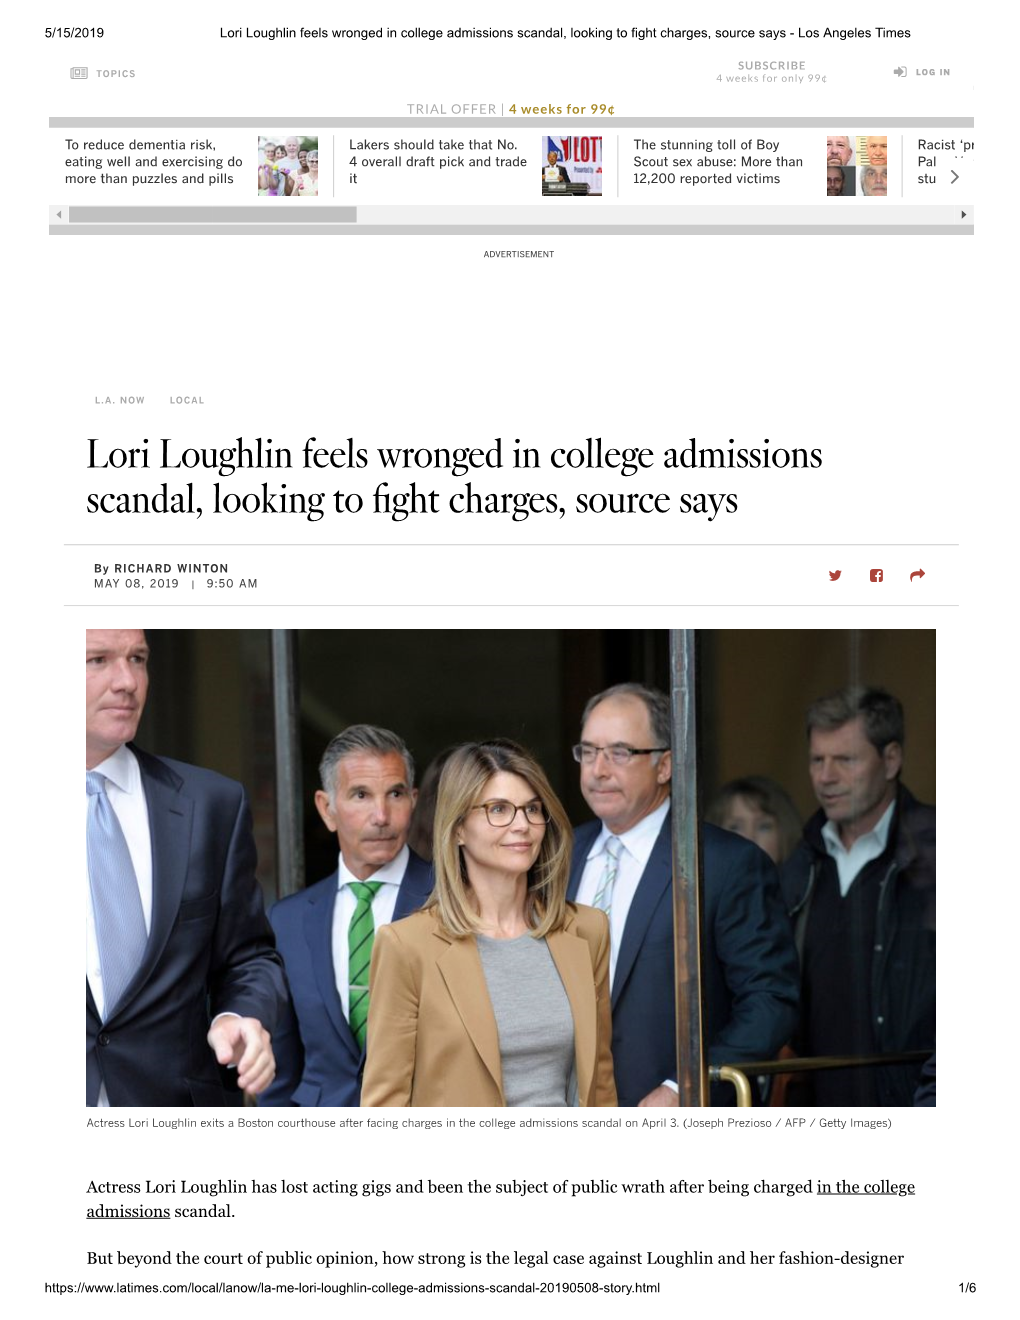 Lori Loughlin Feels Wronged in College Admissions Scandal, Looking to Fight Charges, Source Says - Los Angeles Times